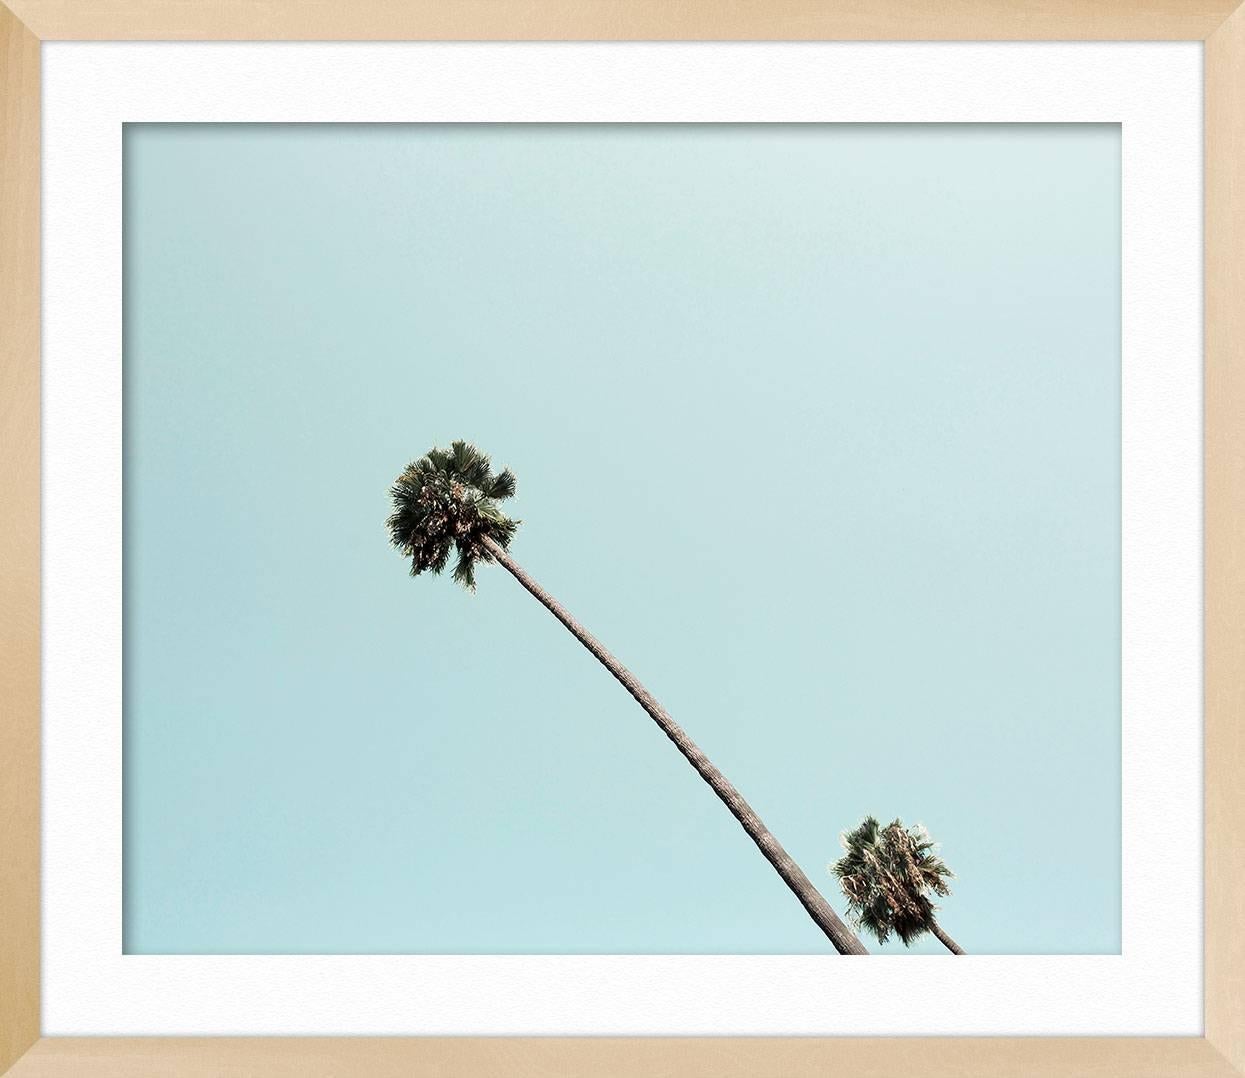 ABOUT THIS PIECE: Photographer Ludwig Favre shot Beverly Hills Palm on his last trip to Los Angeles, California. He is know for a soft, often pastel palette and interesting cropping choices. Our curators recommend this work large format and with a